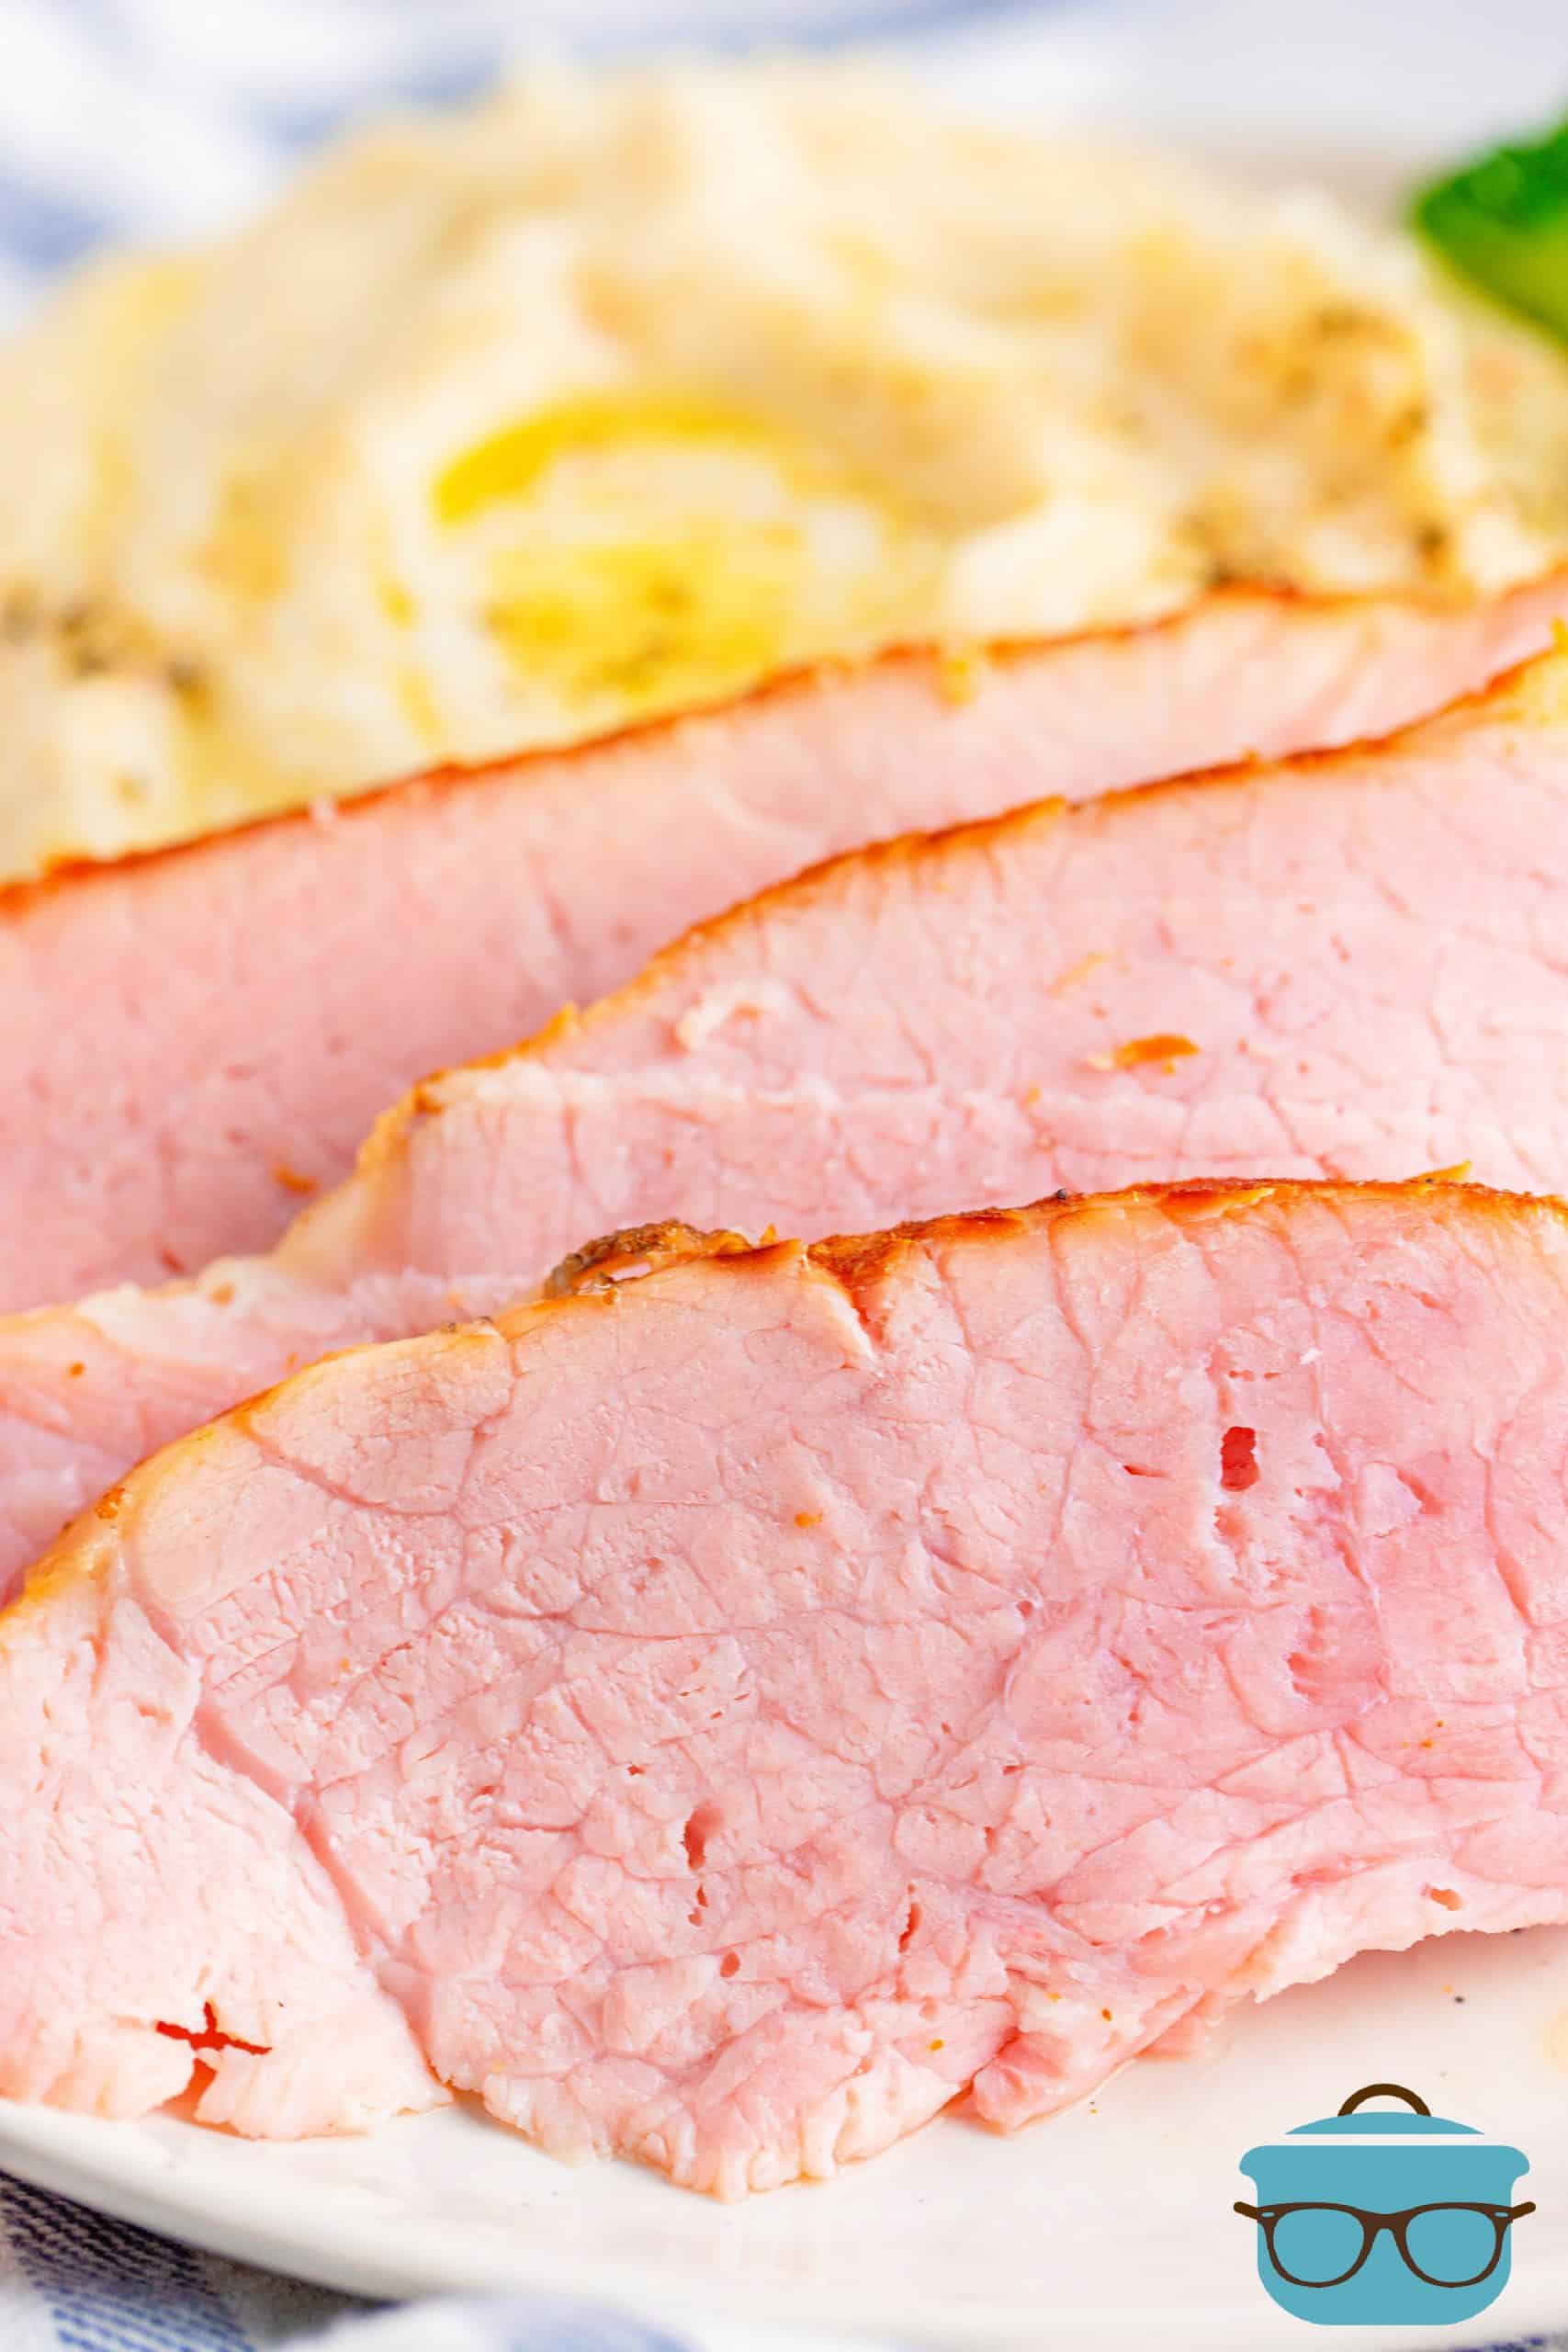 Instant Pot Ham, slices shown on a plate with mashed potatoes.